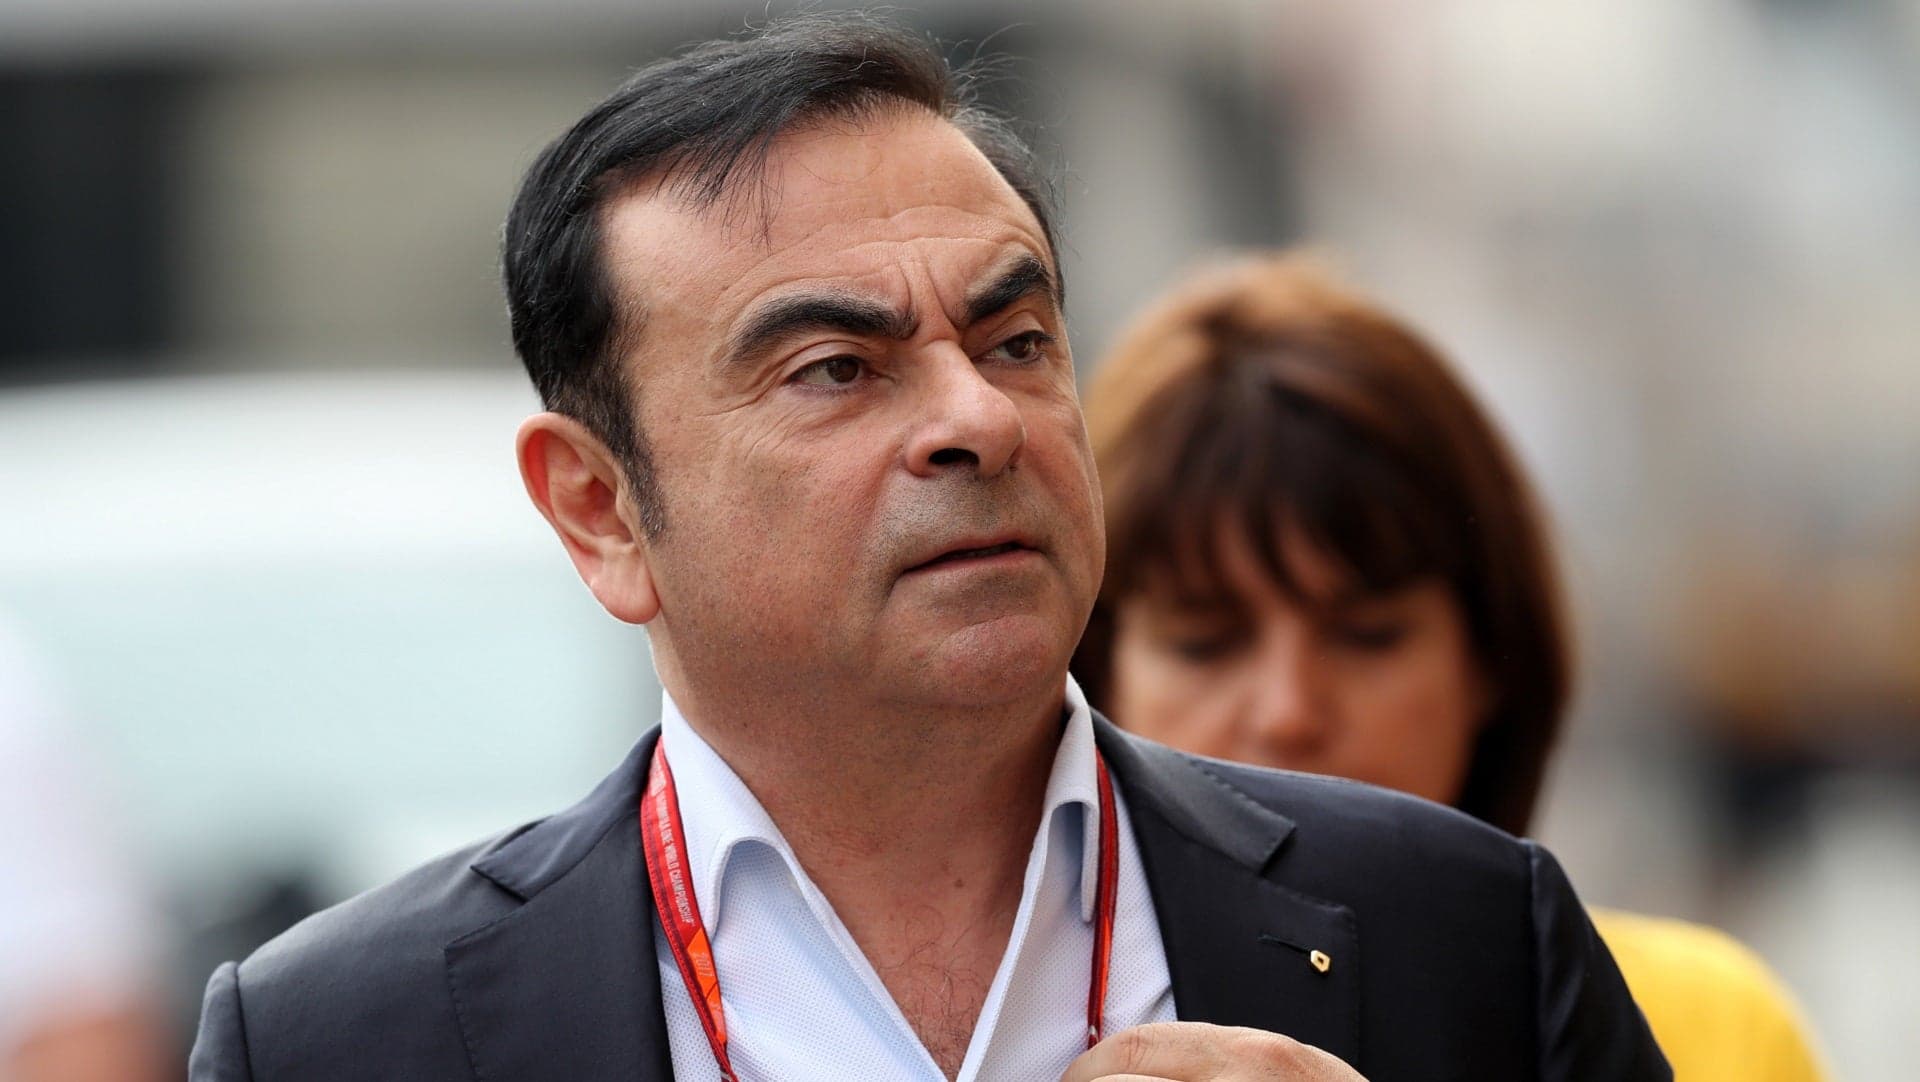 Prosecutors Indict Nissan, Former CEO Carlos Ghosn, and Aide Greg Kelly for Financial Misconduct